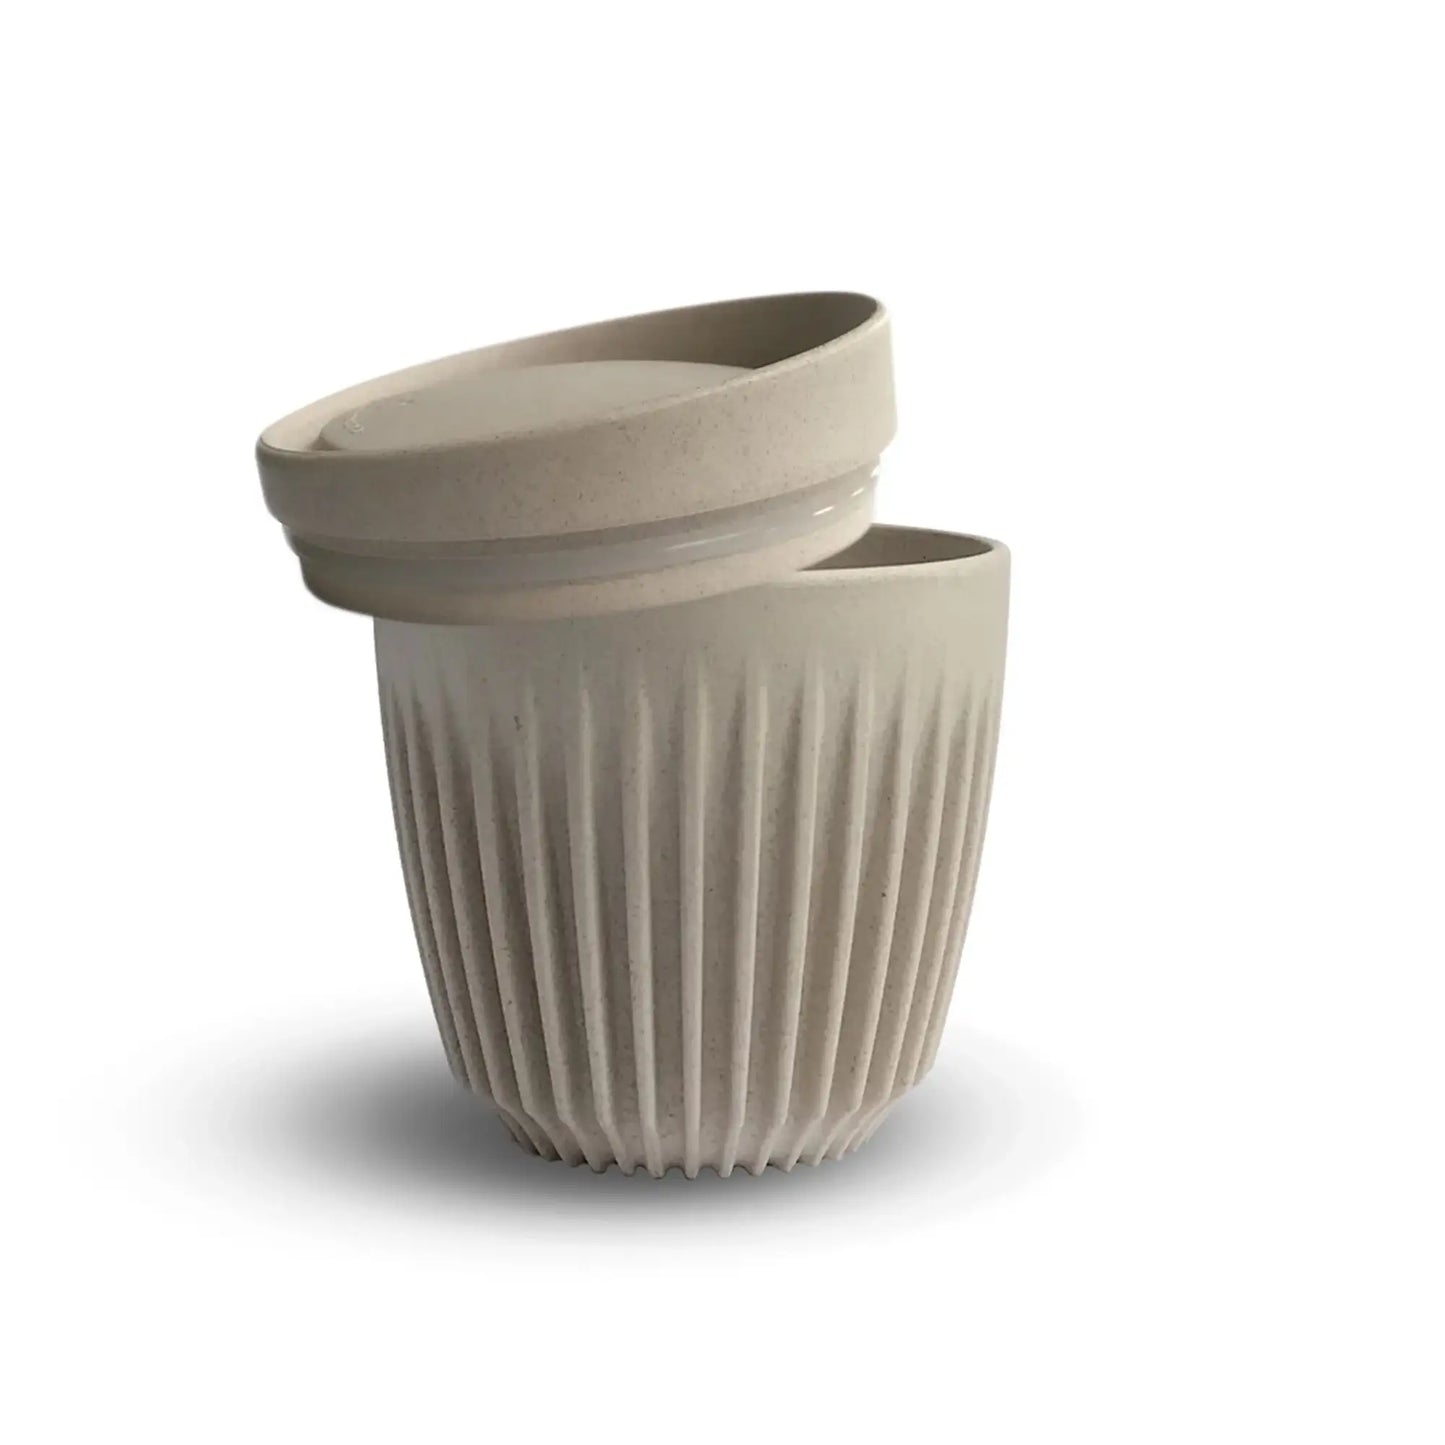 Huskee cup with lid - 175 ml (6 oz) - Natural.